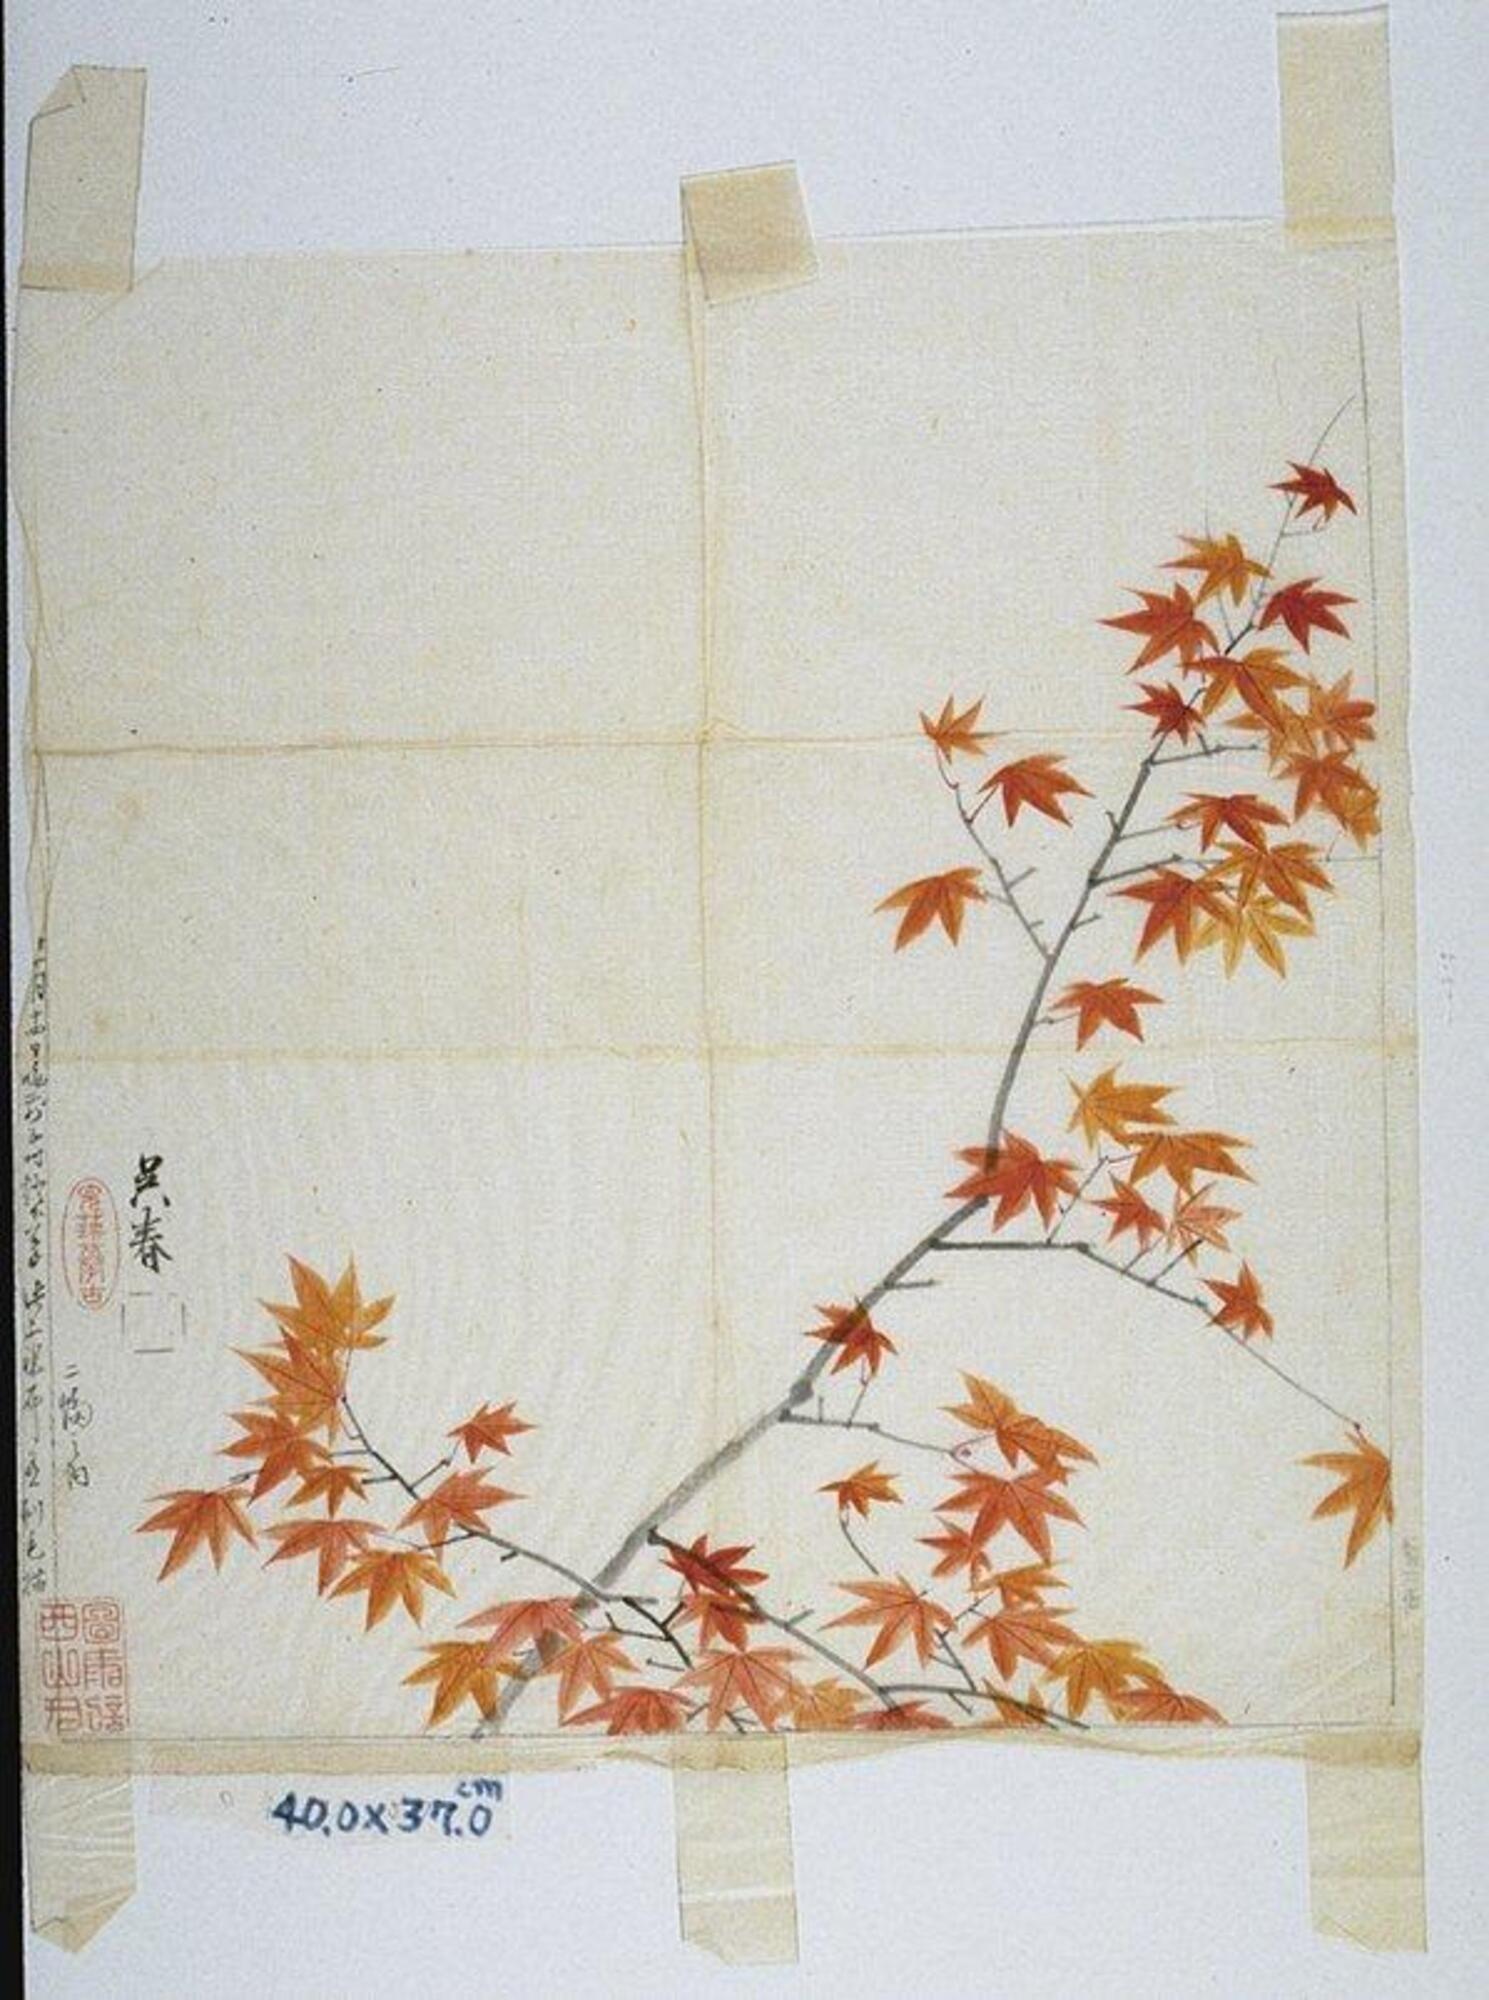 There is a single branch that rises from the bottom of the painting and that ends at the top of the painting. There are smaller twigs that jut out from the main branch and that each have&nbsp;vibrant red-orange maple leaves growing from them. There are signatures and seals in the bottom left corner of the painting.